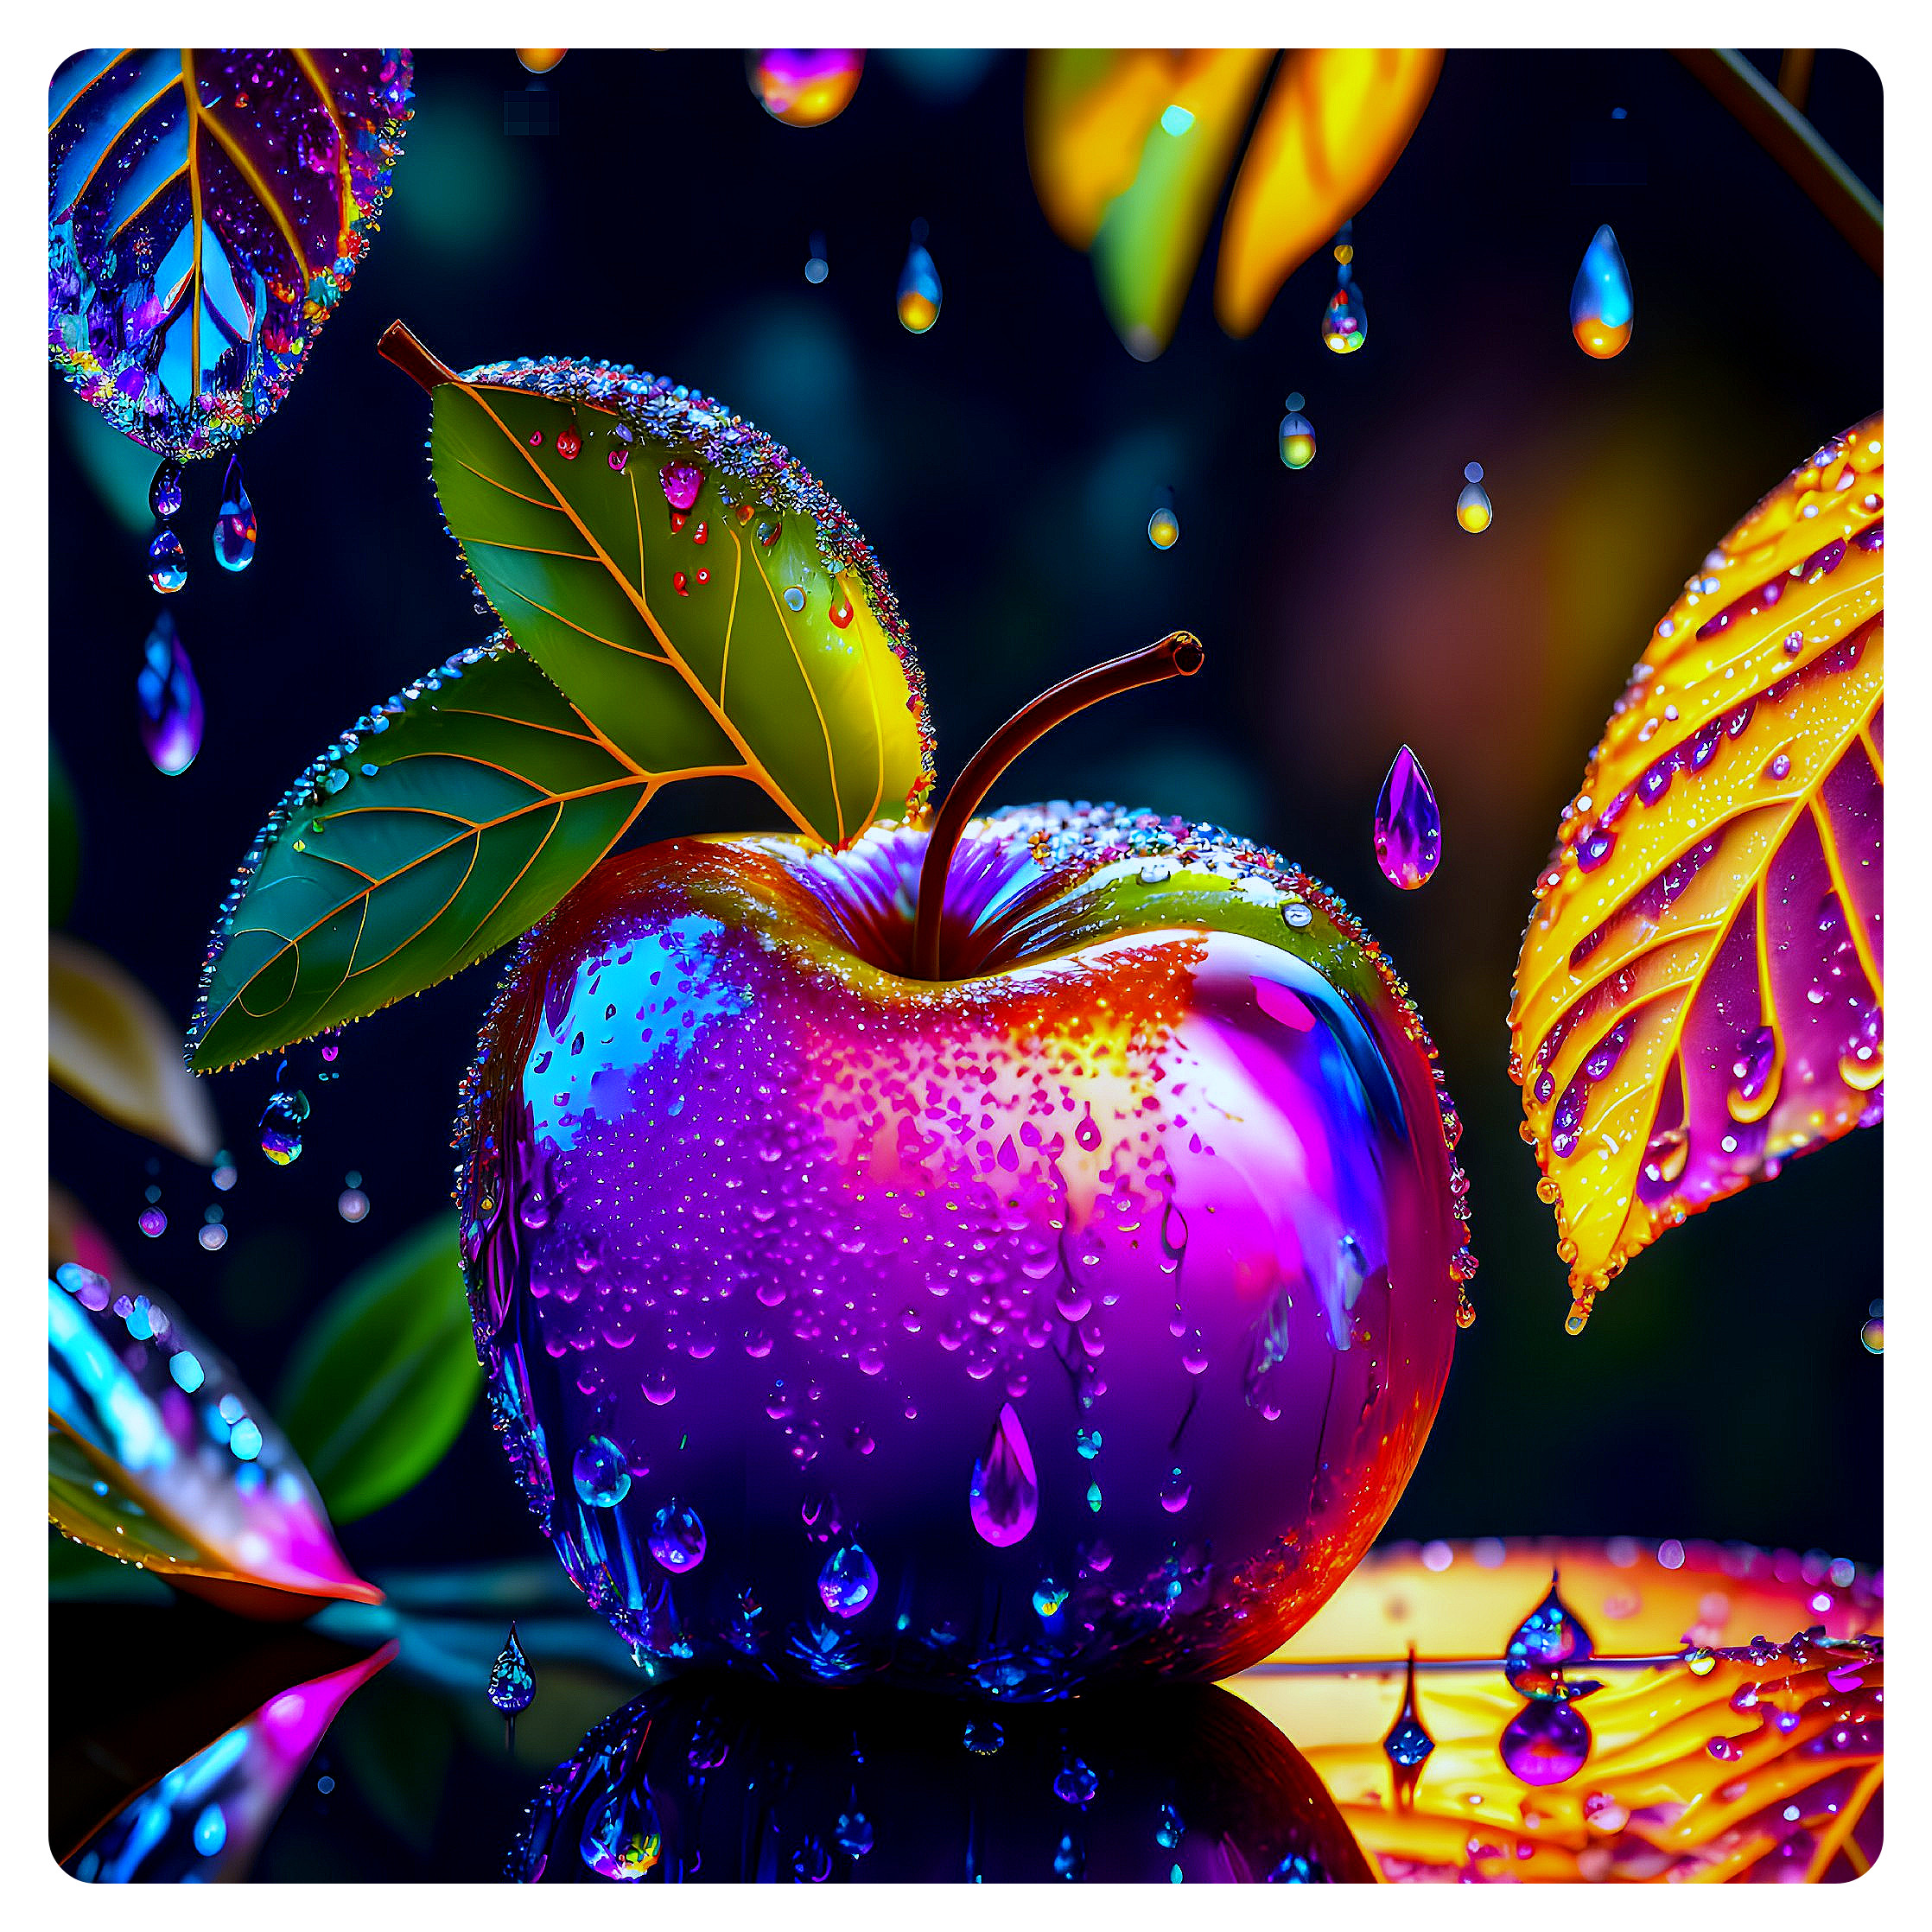 Colorful digital artwork: Dew-covered apple with glistening leaves